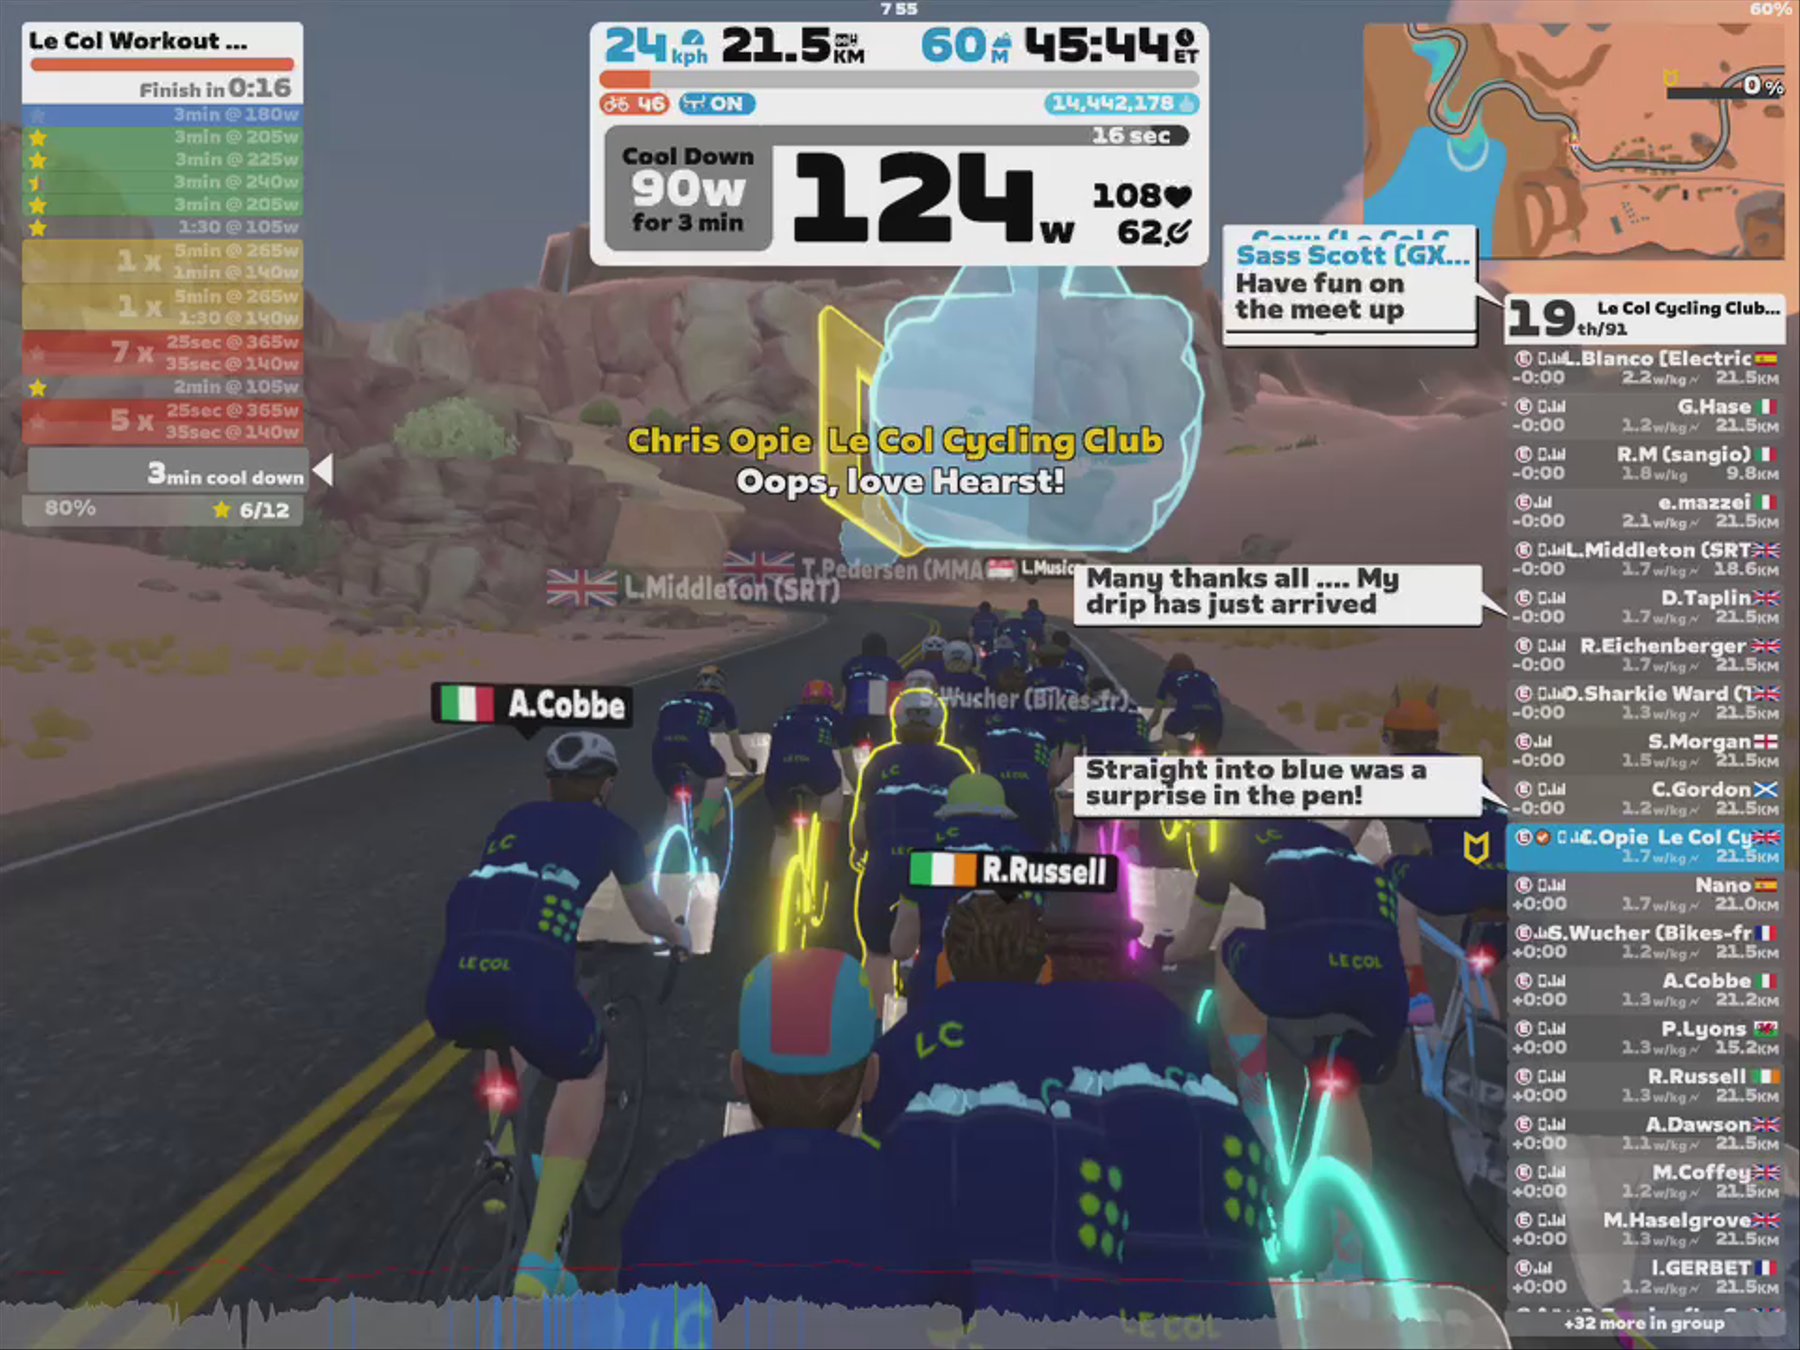 Zwift - Group Workout: Le Col Cycling Club Community Sessions (E) on Tick Tock in Watopia